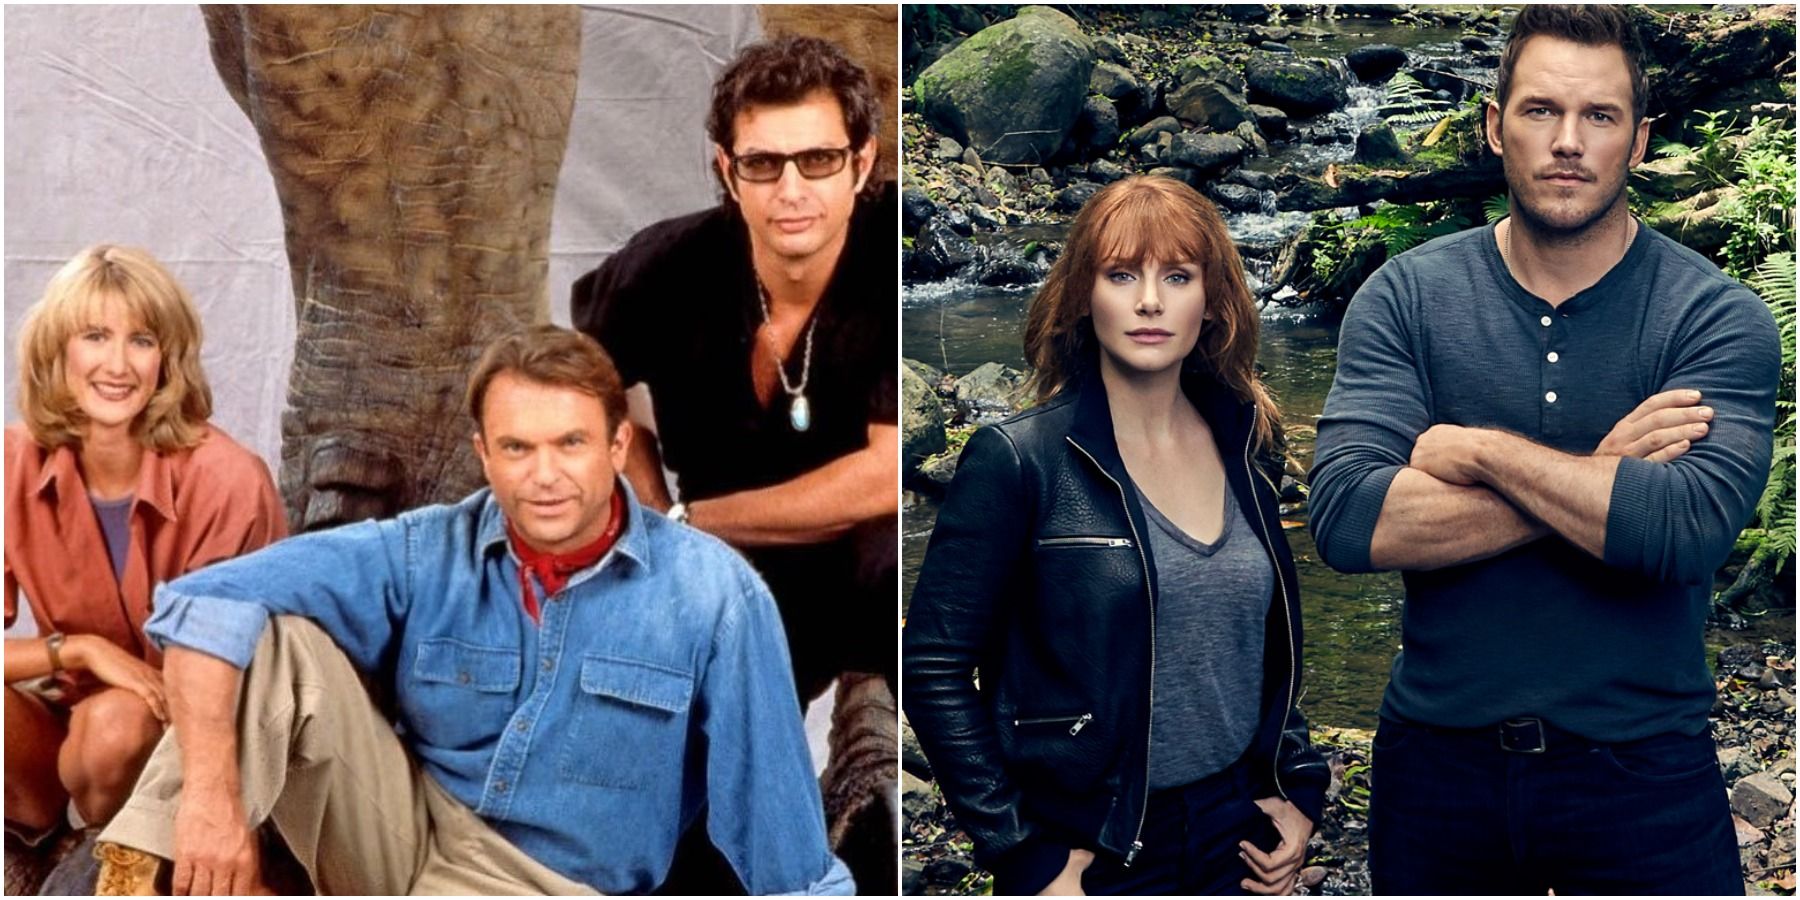 Heroes in Jurassic Park and Jurassic World